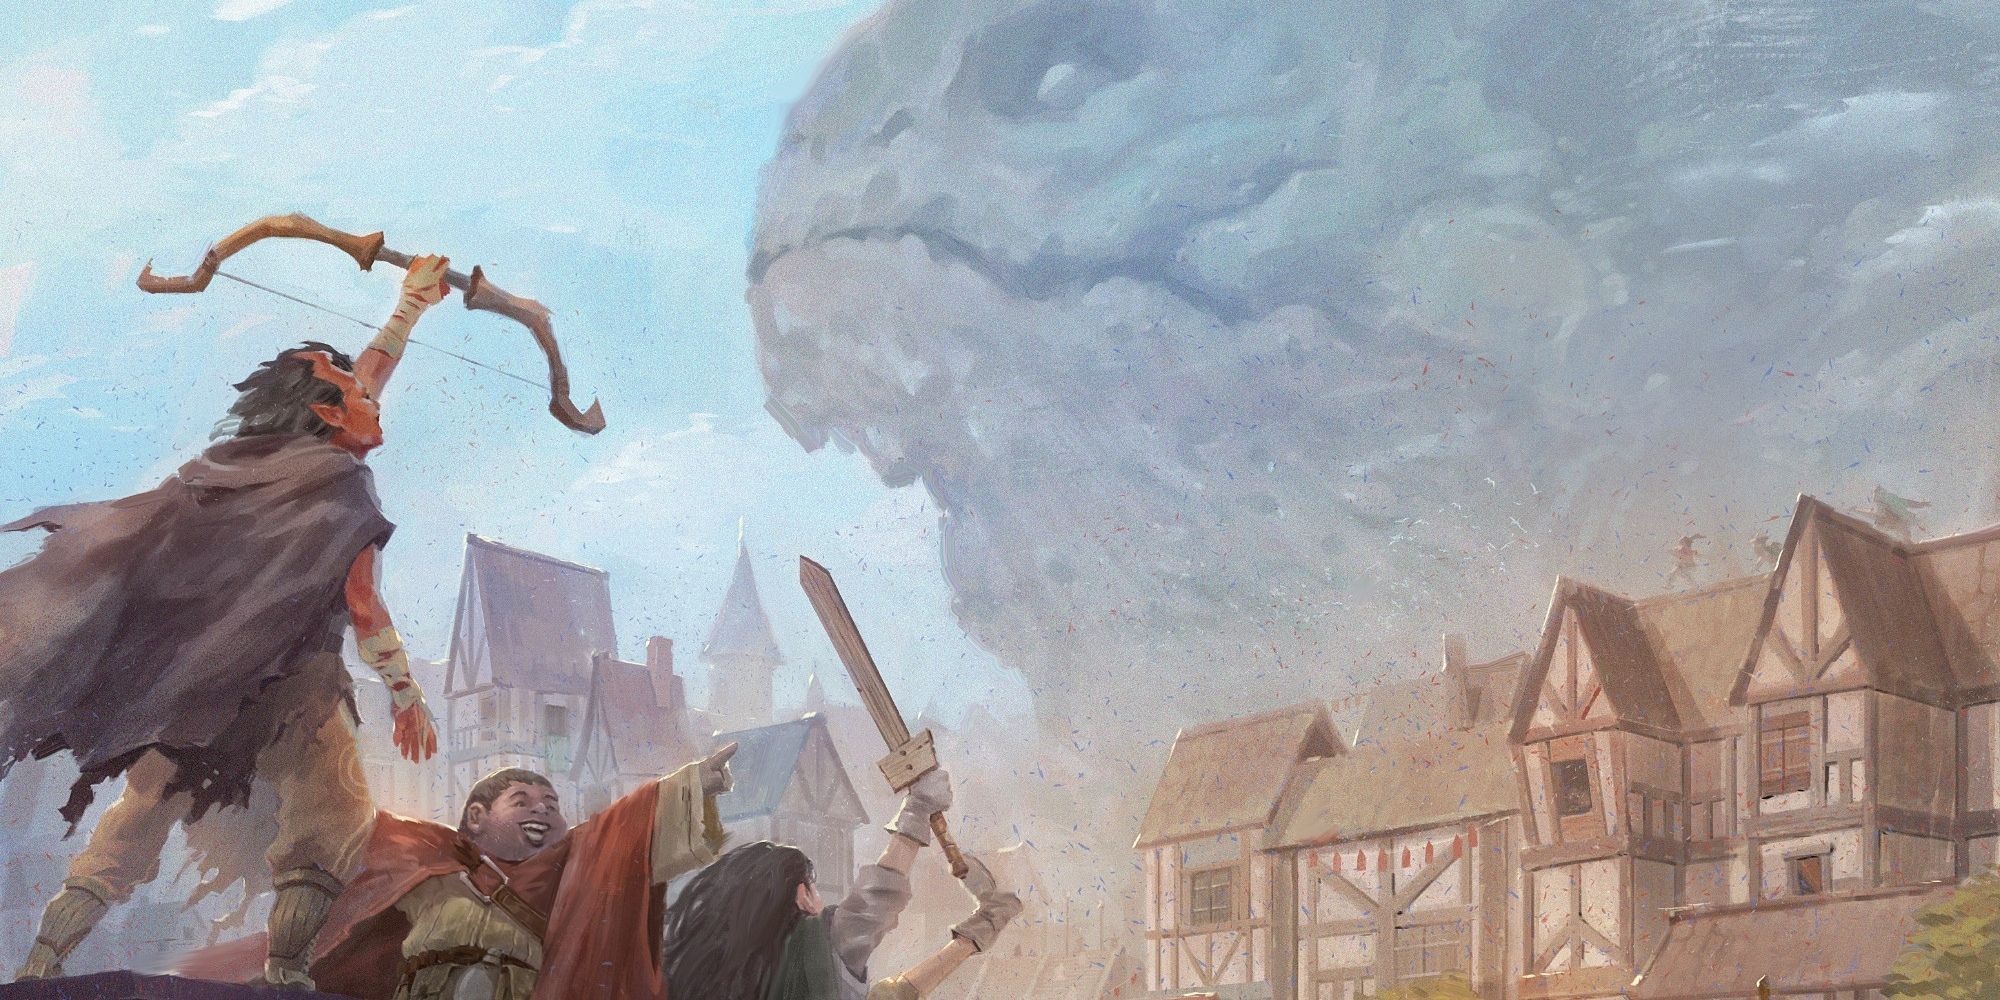 Dungeons And Dragons - Monster looming over a town